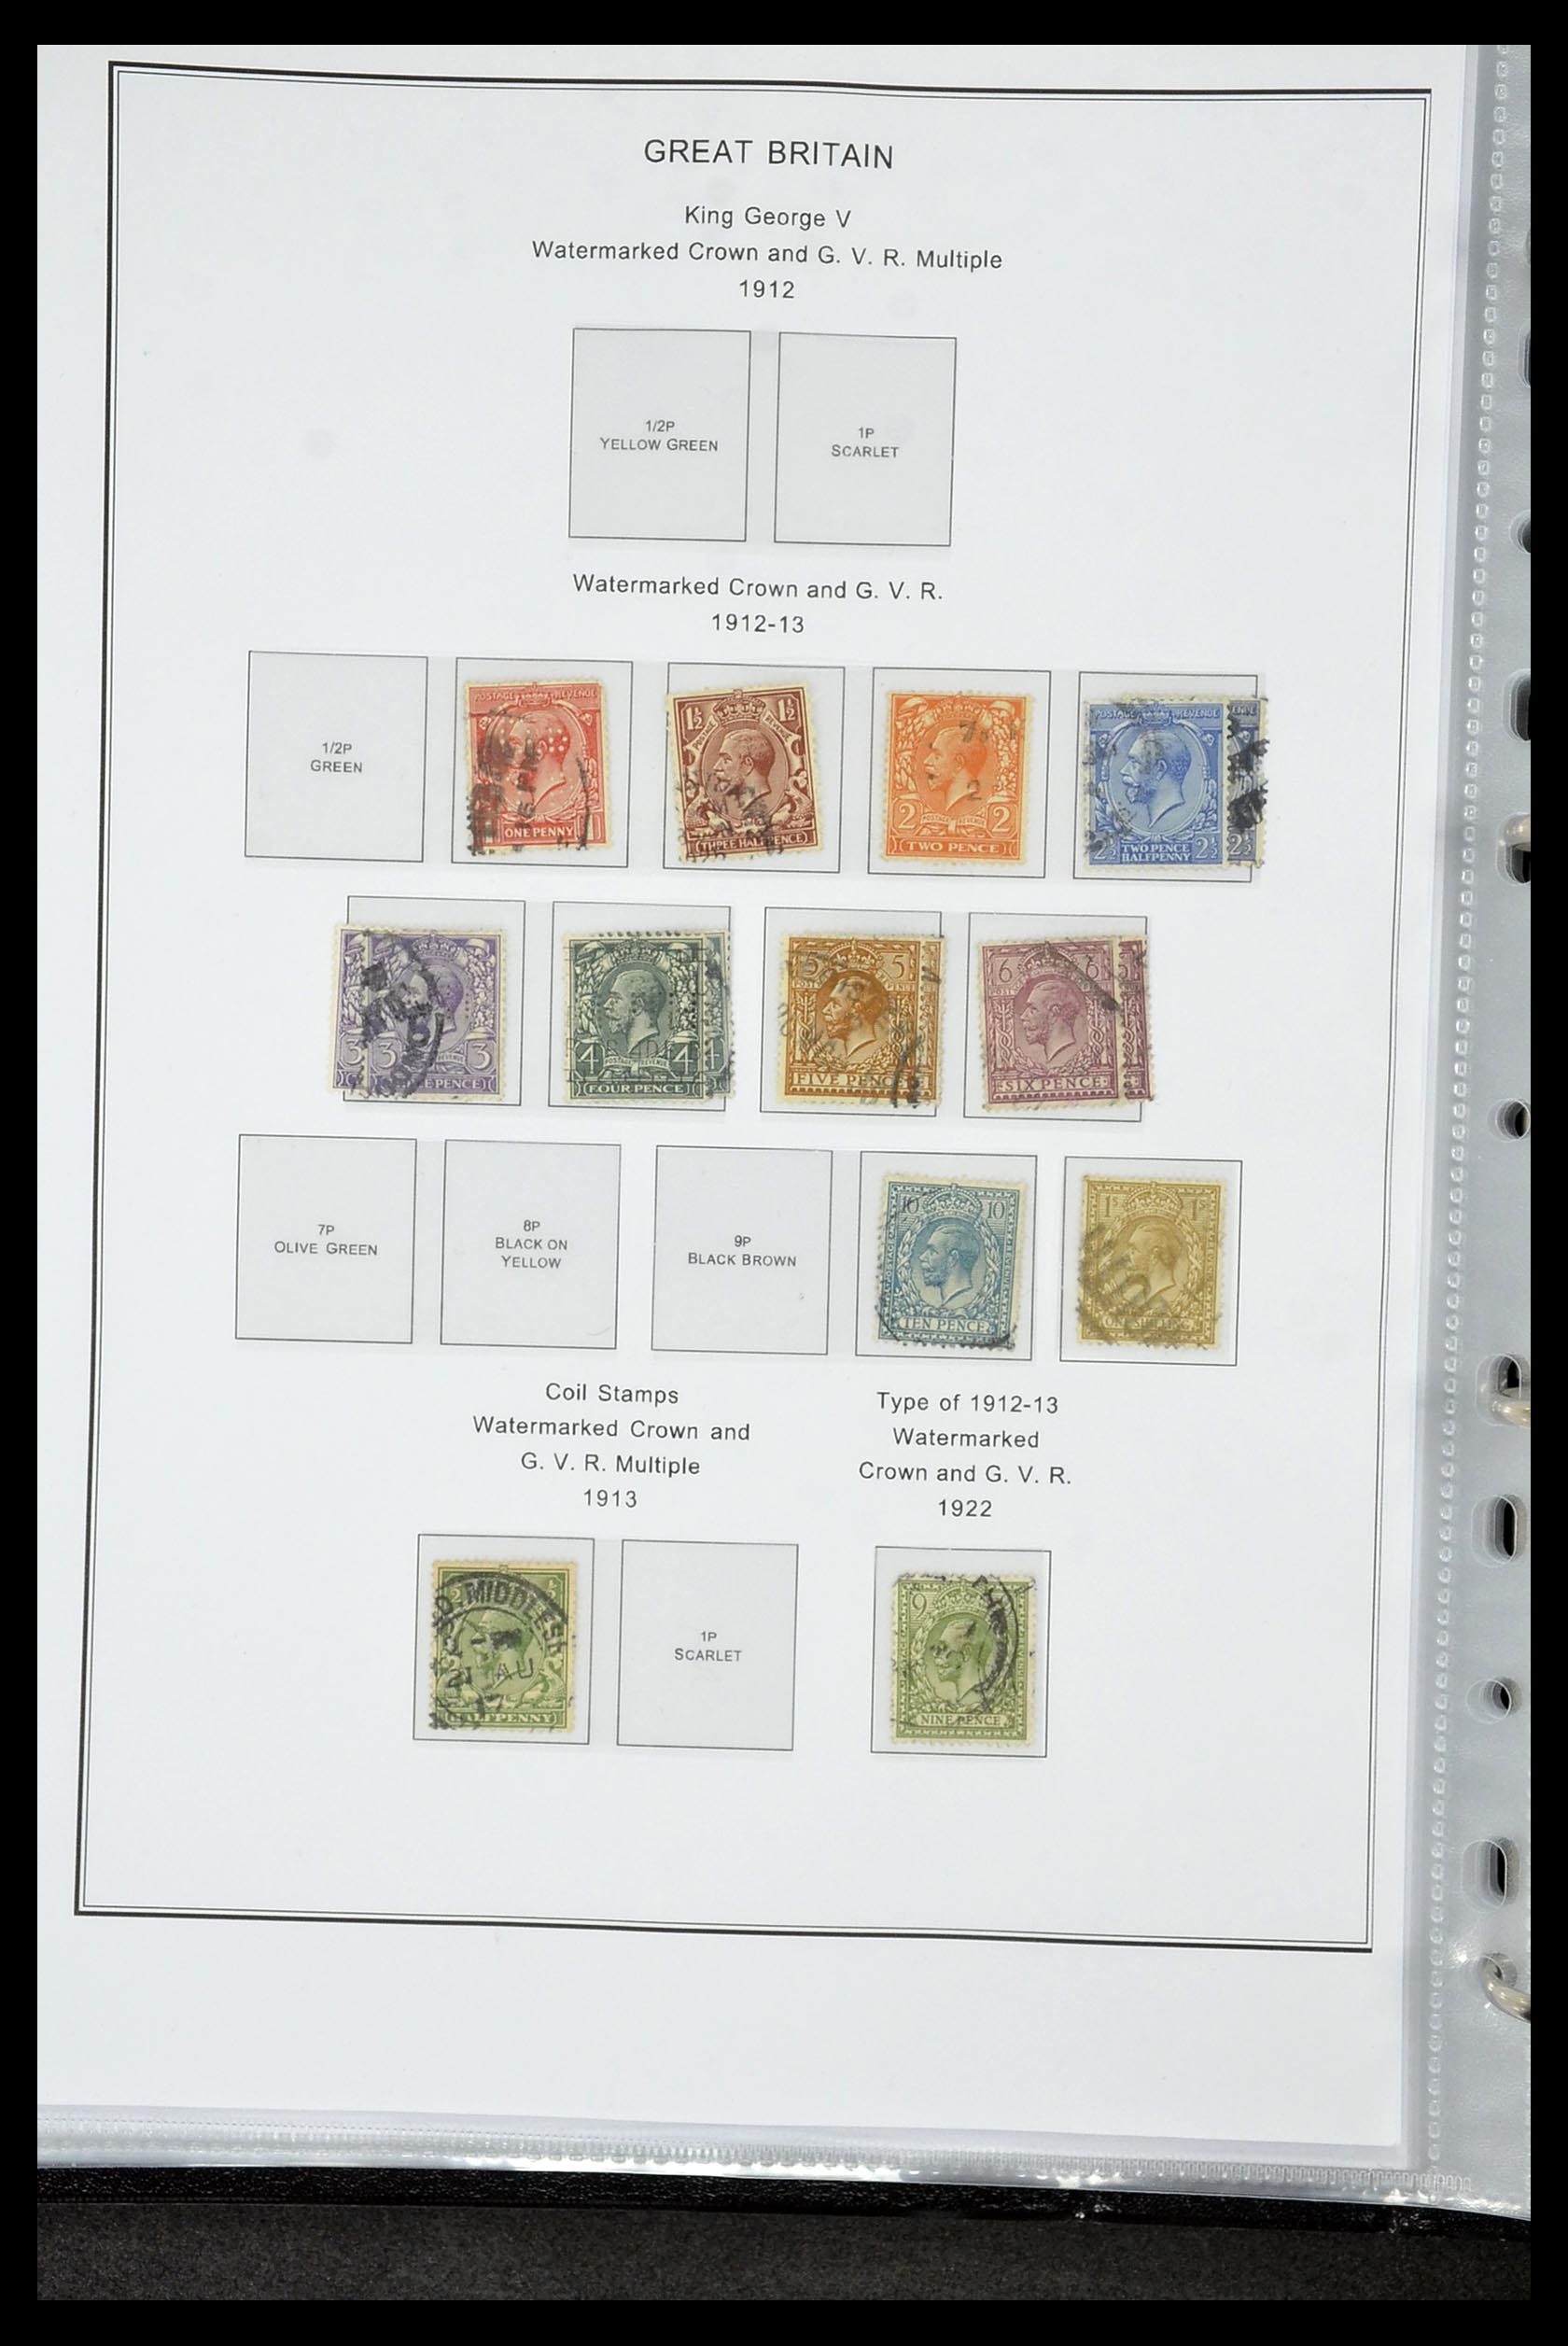 35060 0015 - Stamp Collection 35060 Great Britain and Commonwealth 1840-1970.